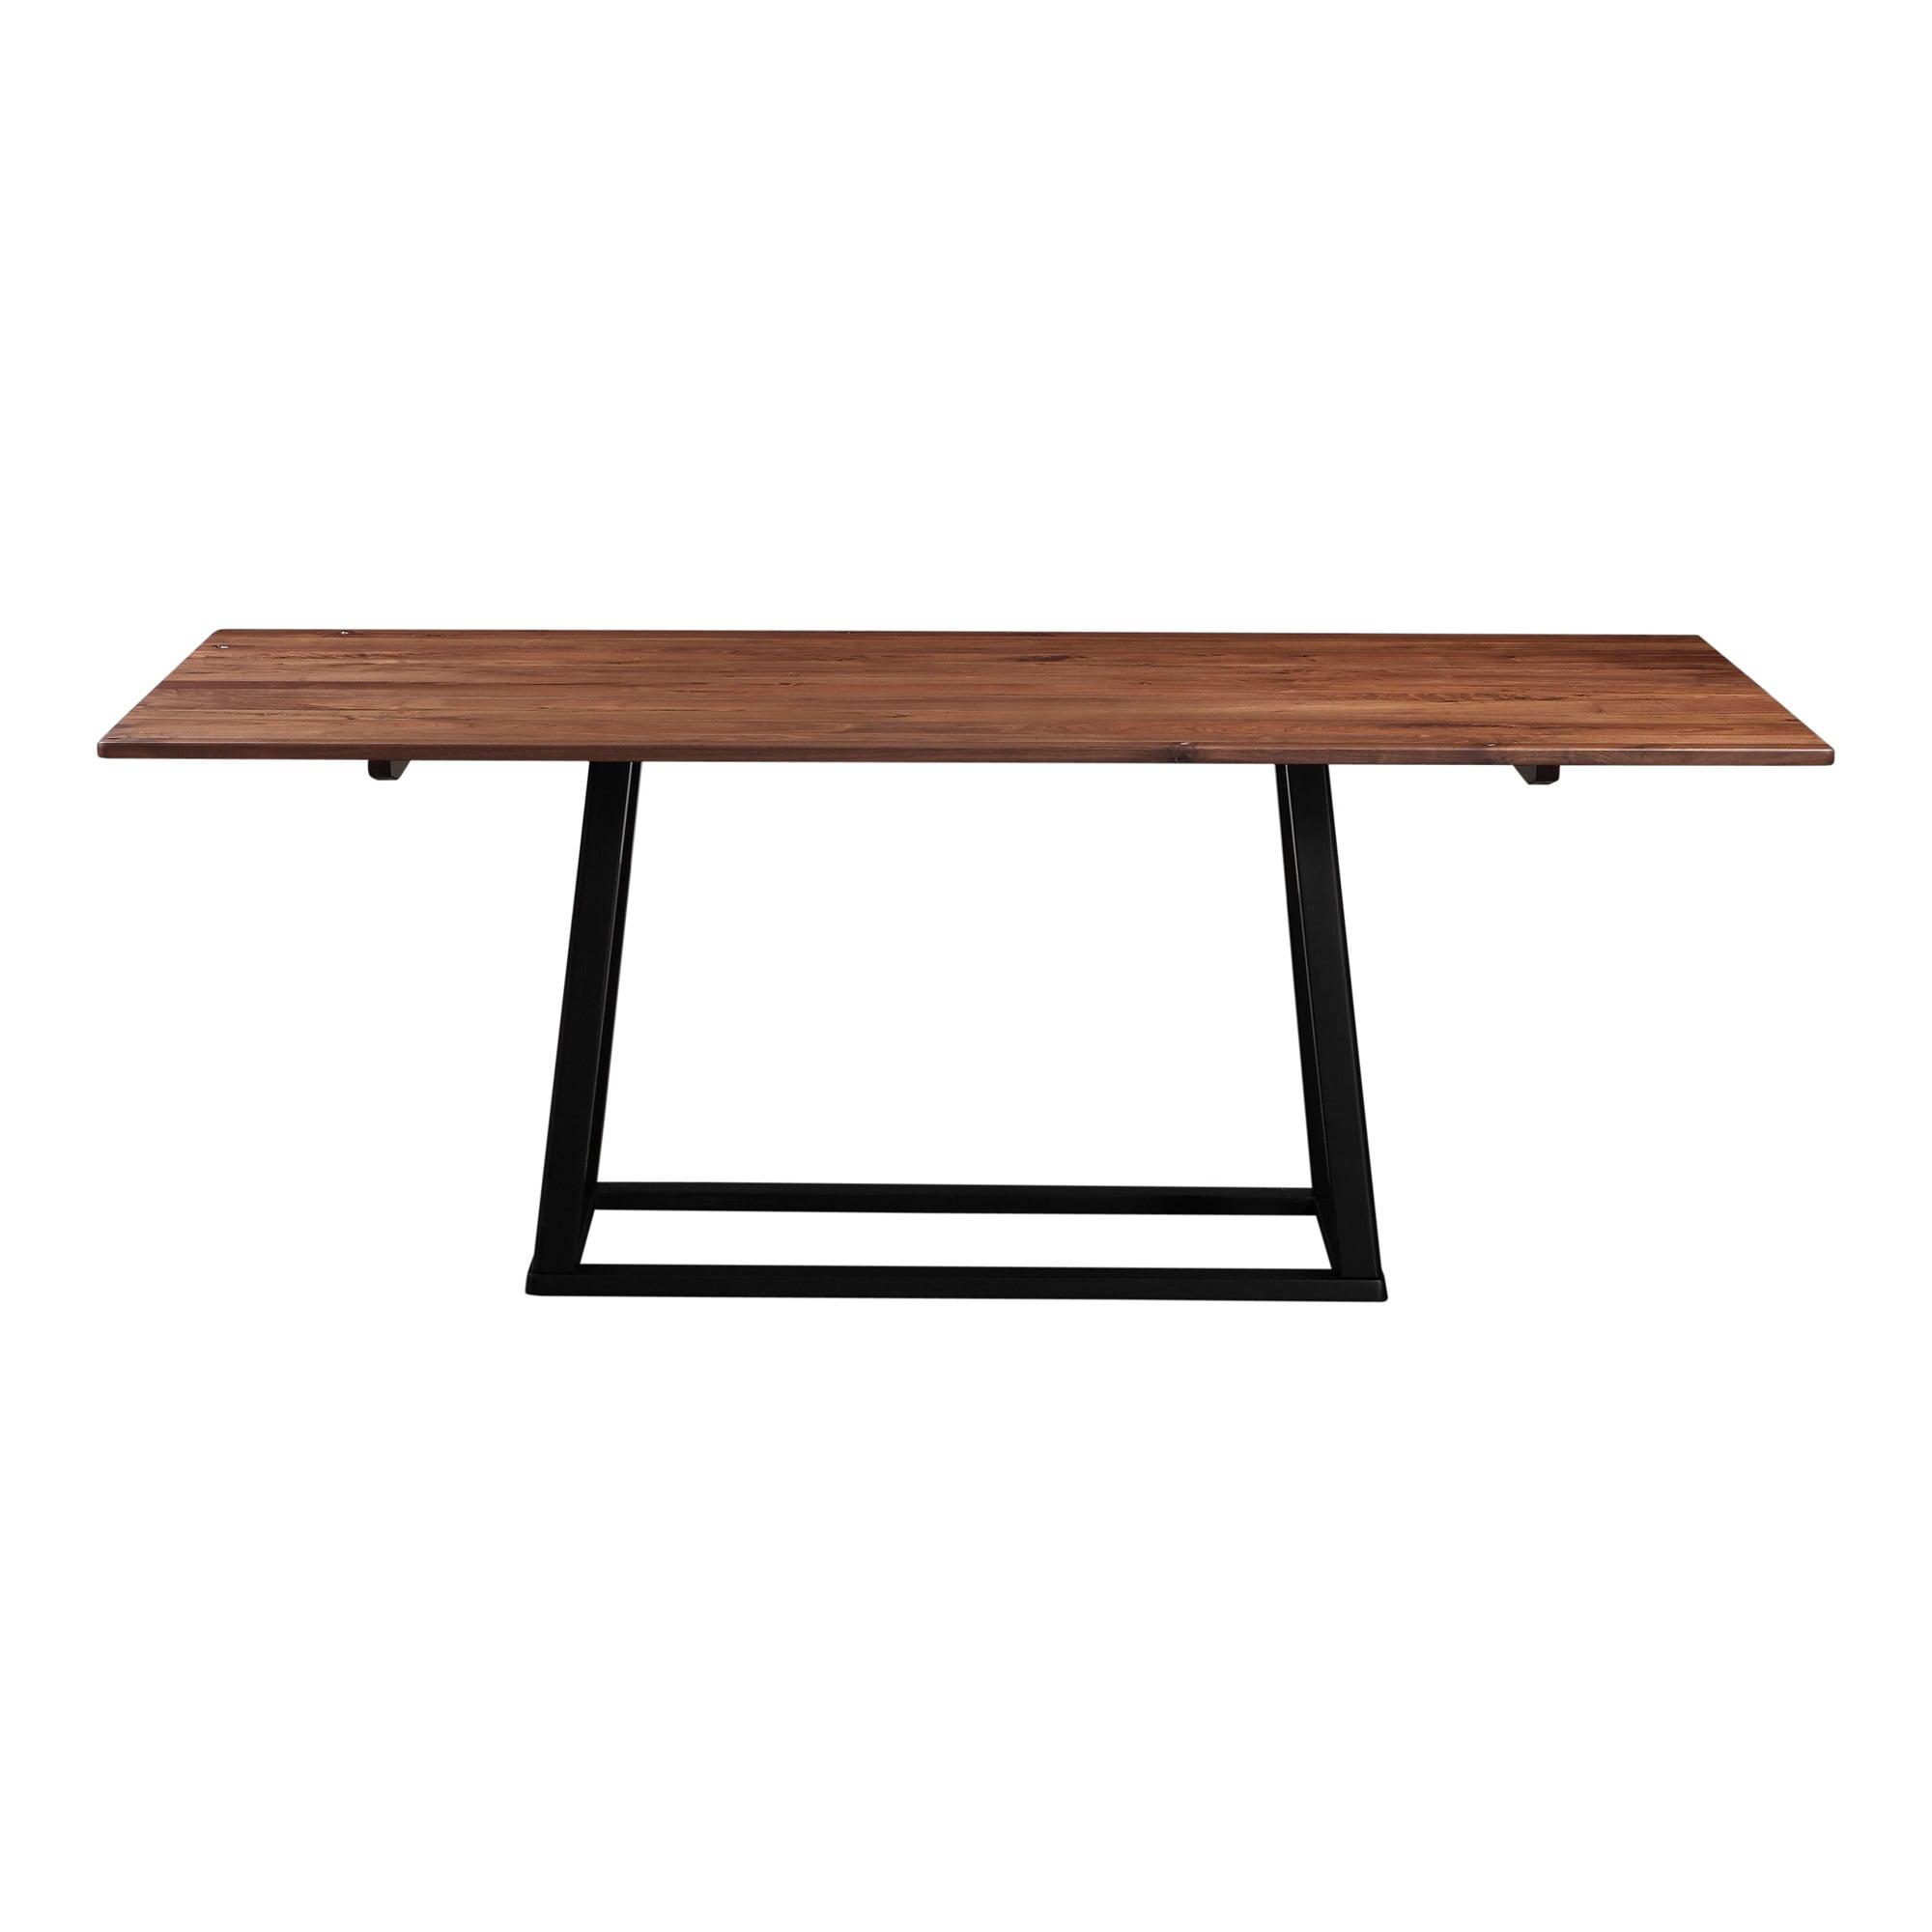 Contemporary Reclaimed Wood Rectangular Dining Table in Black/Brown